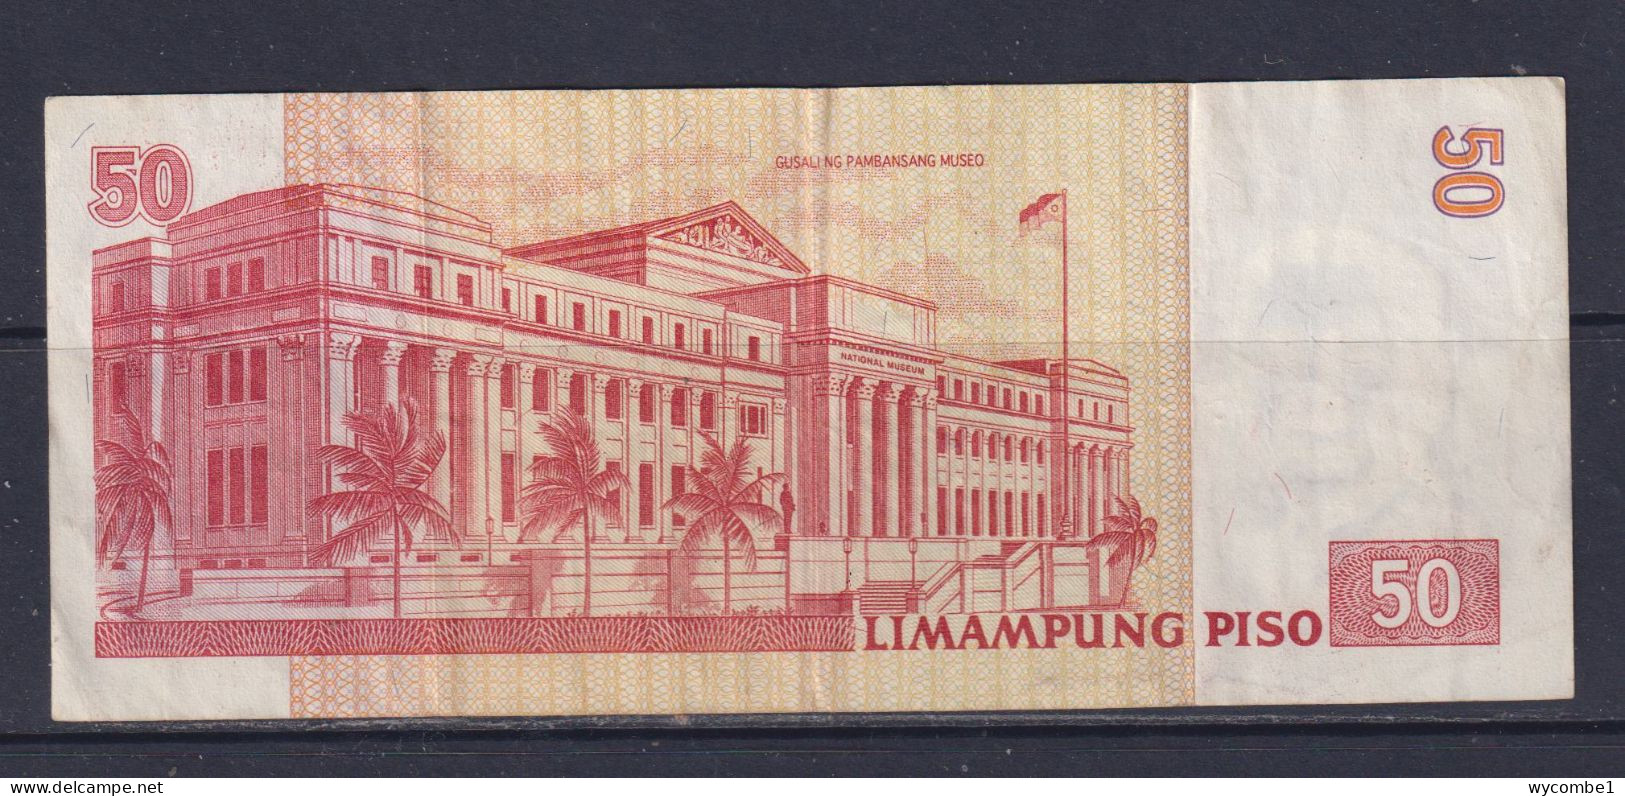 PHILIPPINES - 2003 50 Pesos Circulated Banknote - Philippinen